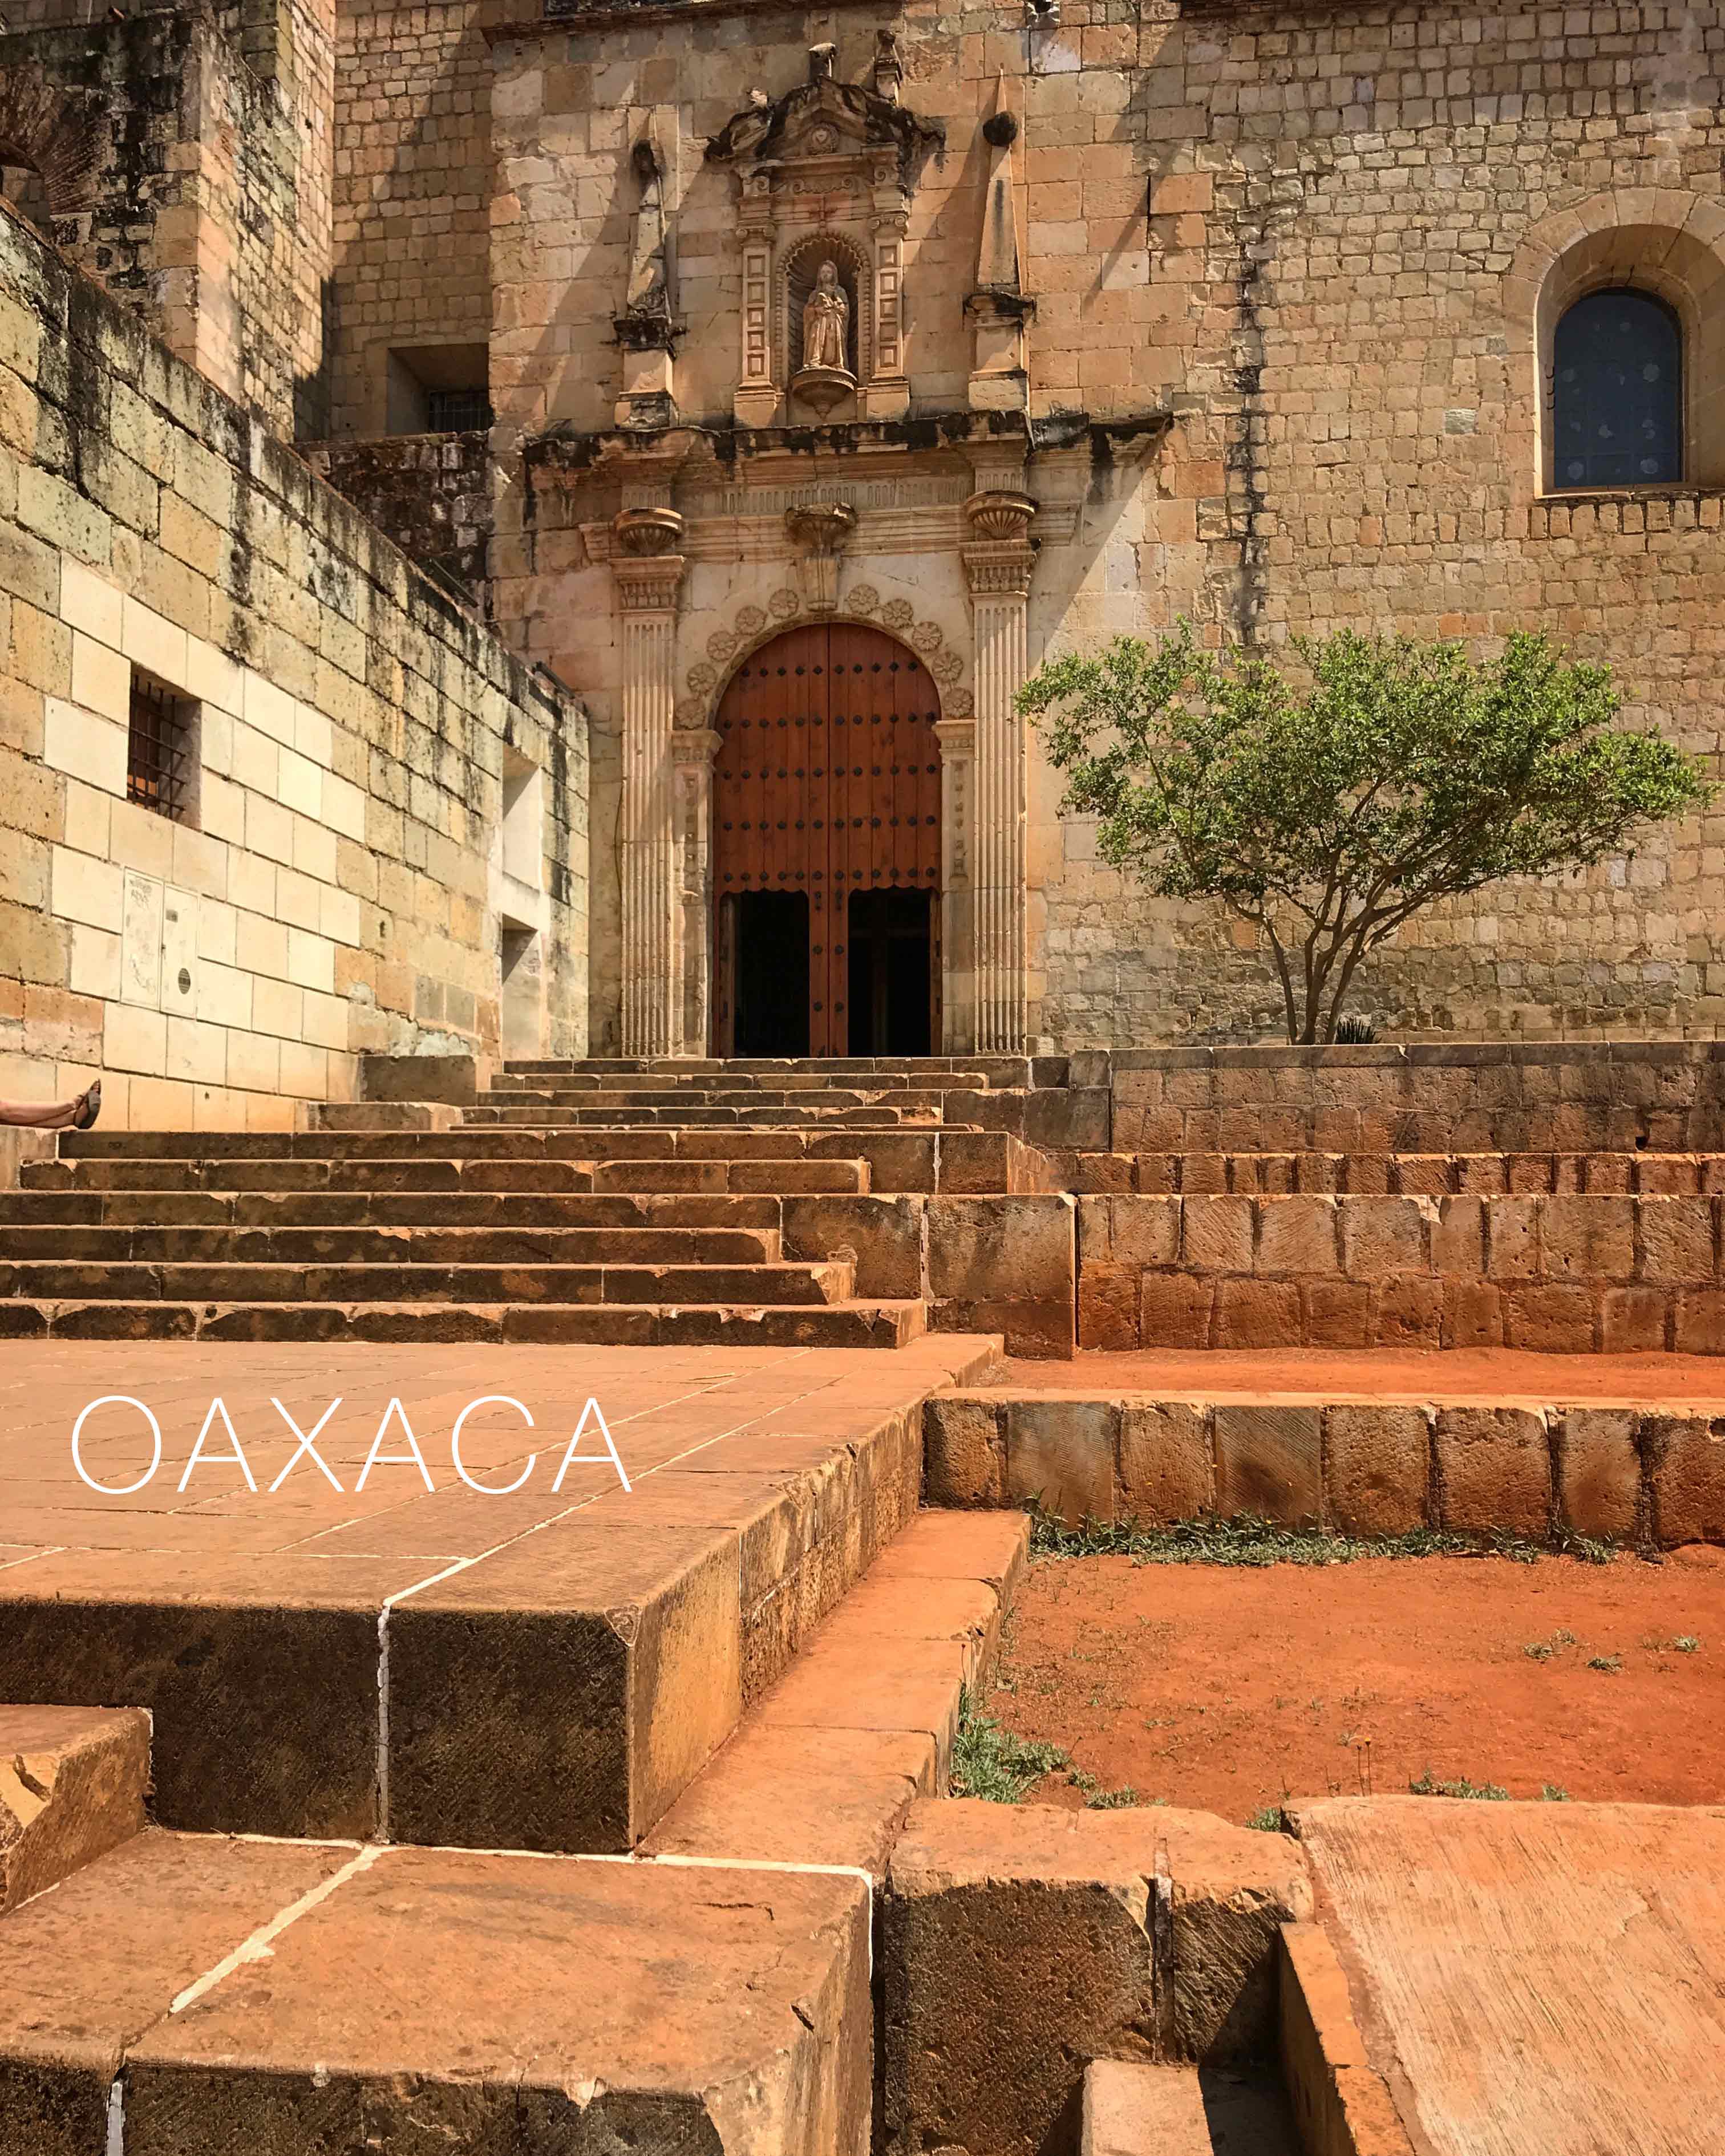 travel guide and tip sheet for oaxaca city, mexico. The best restaurants, bars, shopping and design minded places in Oaxaca.